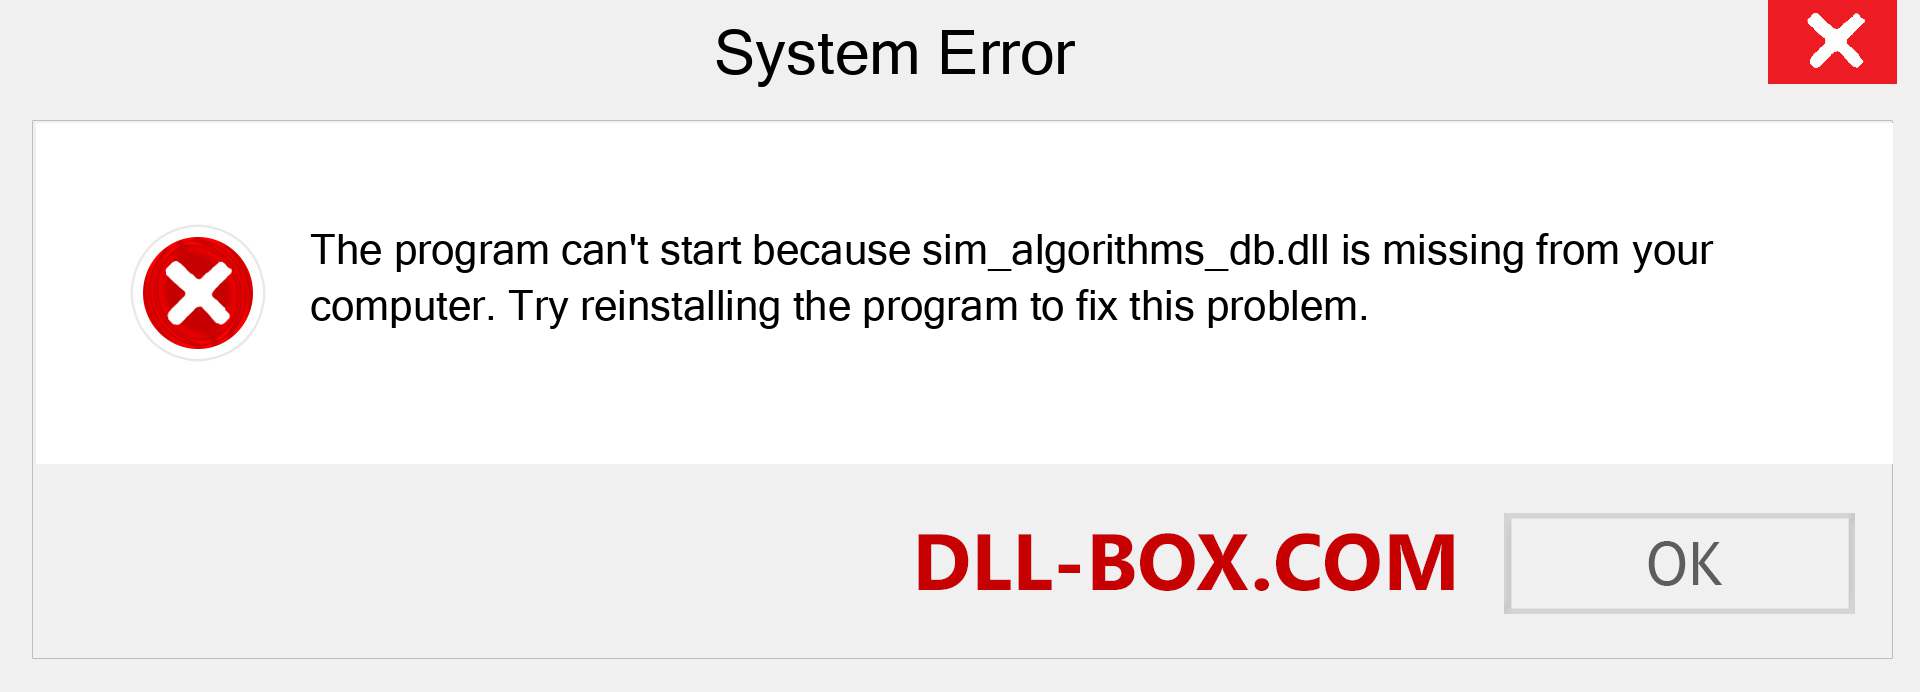  sim_algorithms_db.dll file is missing?. Download for Windows 7, 8, 10 - Fix  sim_algorithms_db dll Missing Error on Windows, photos, images